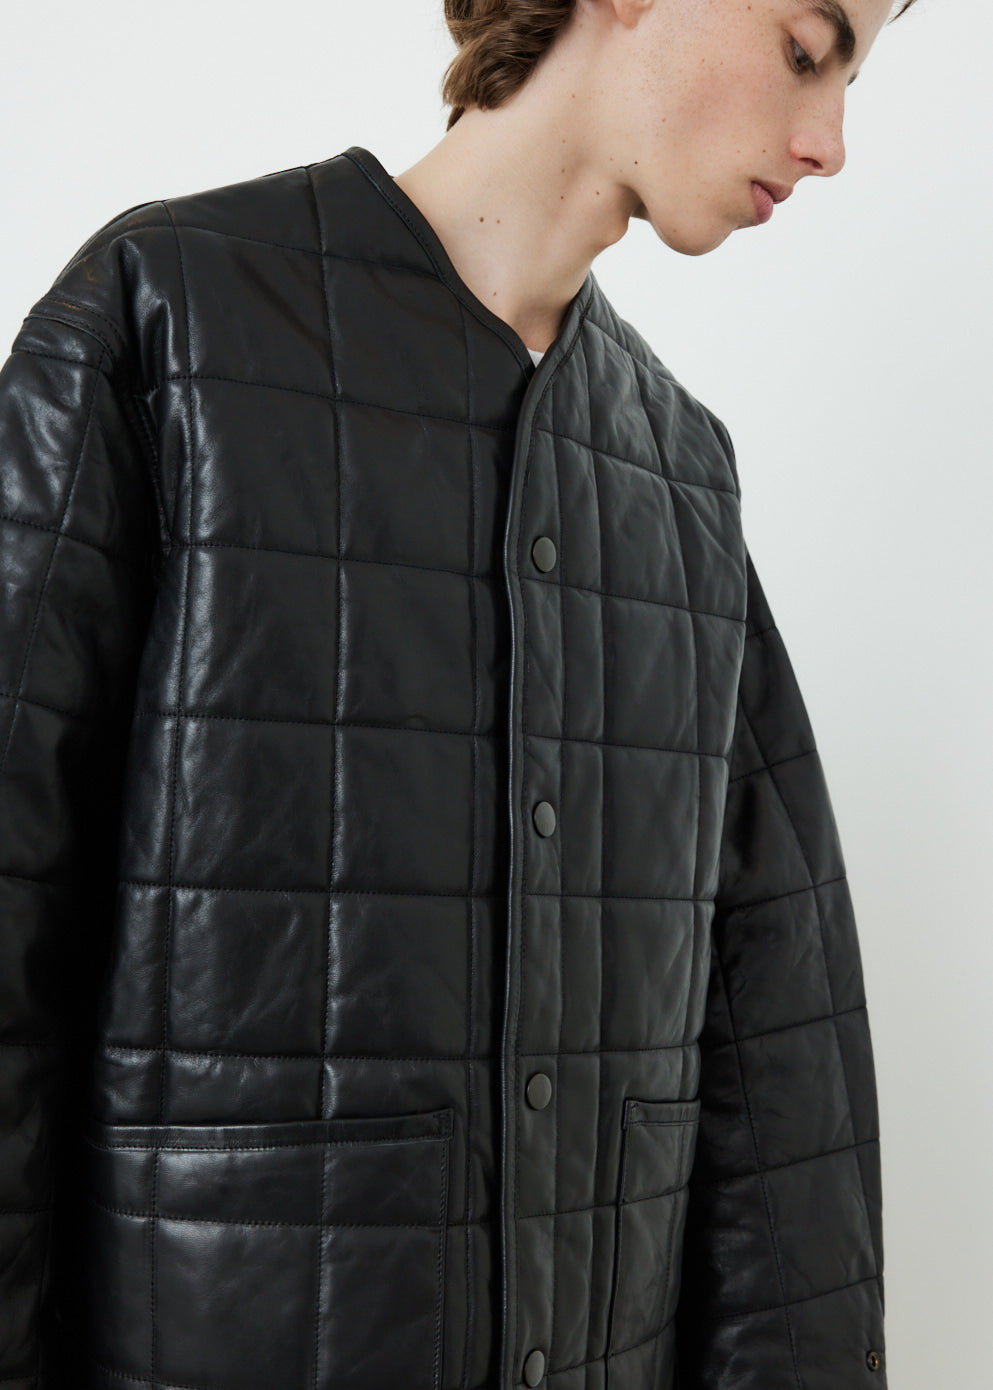 Reversible Quilted Leather Liner Blouson